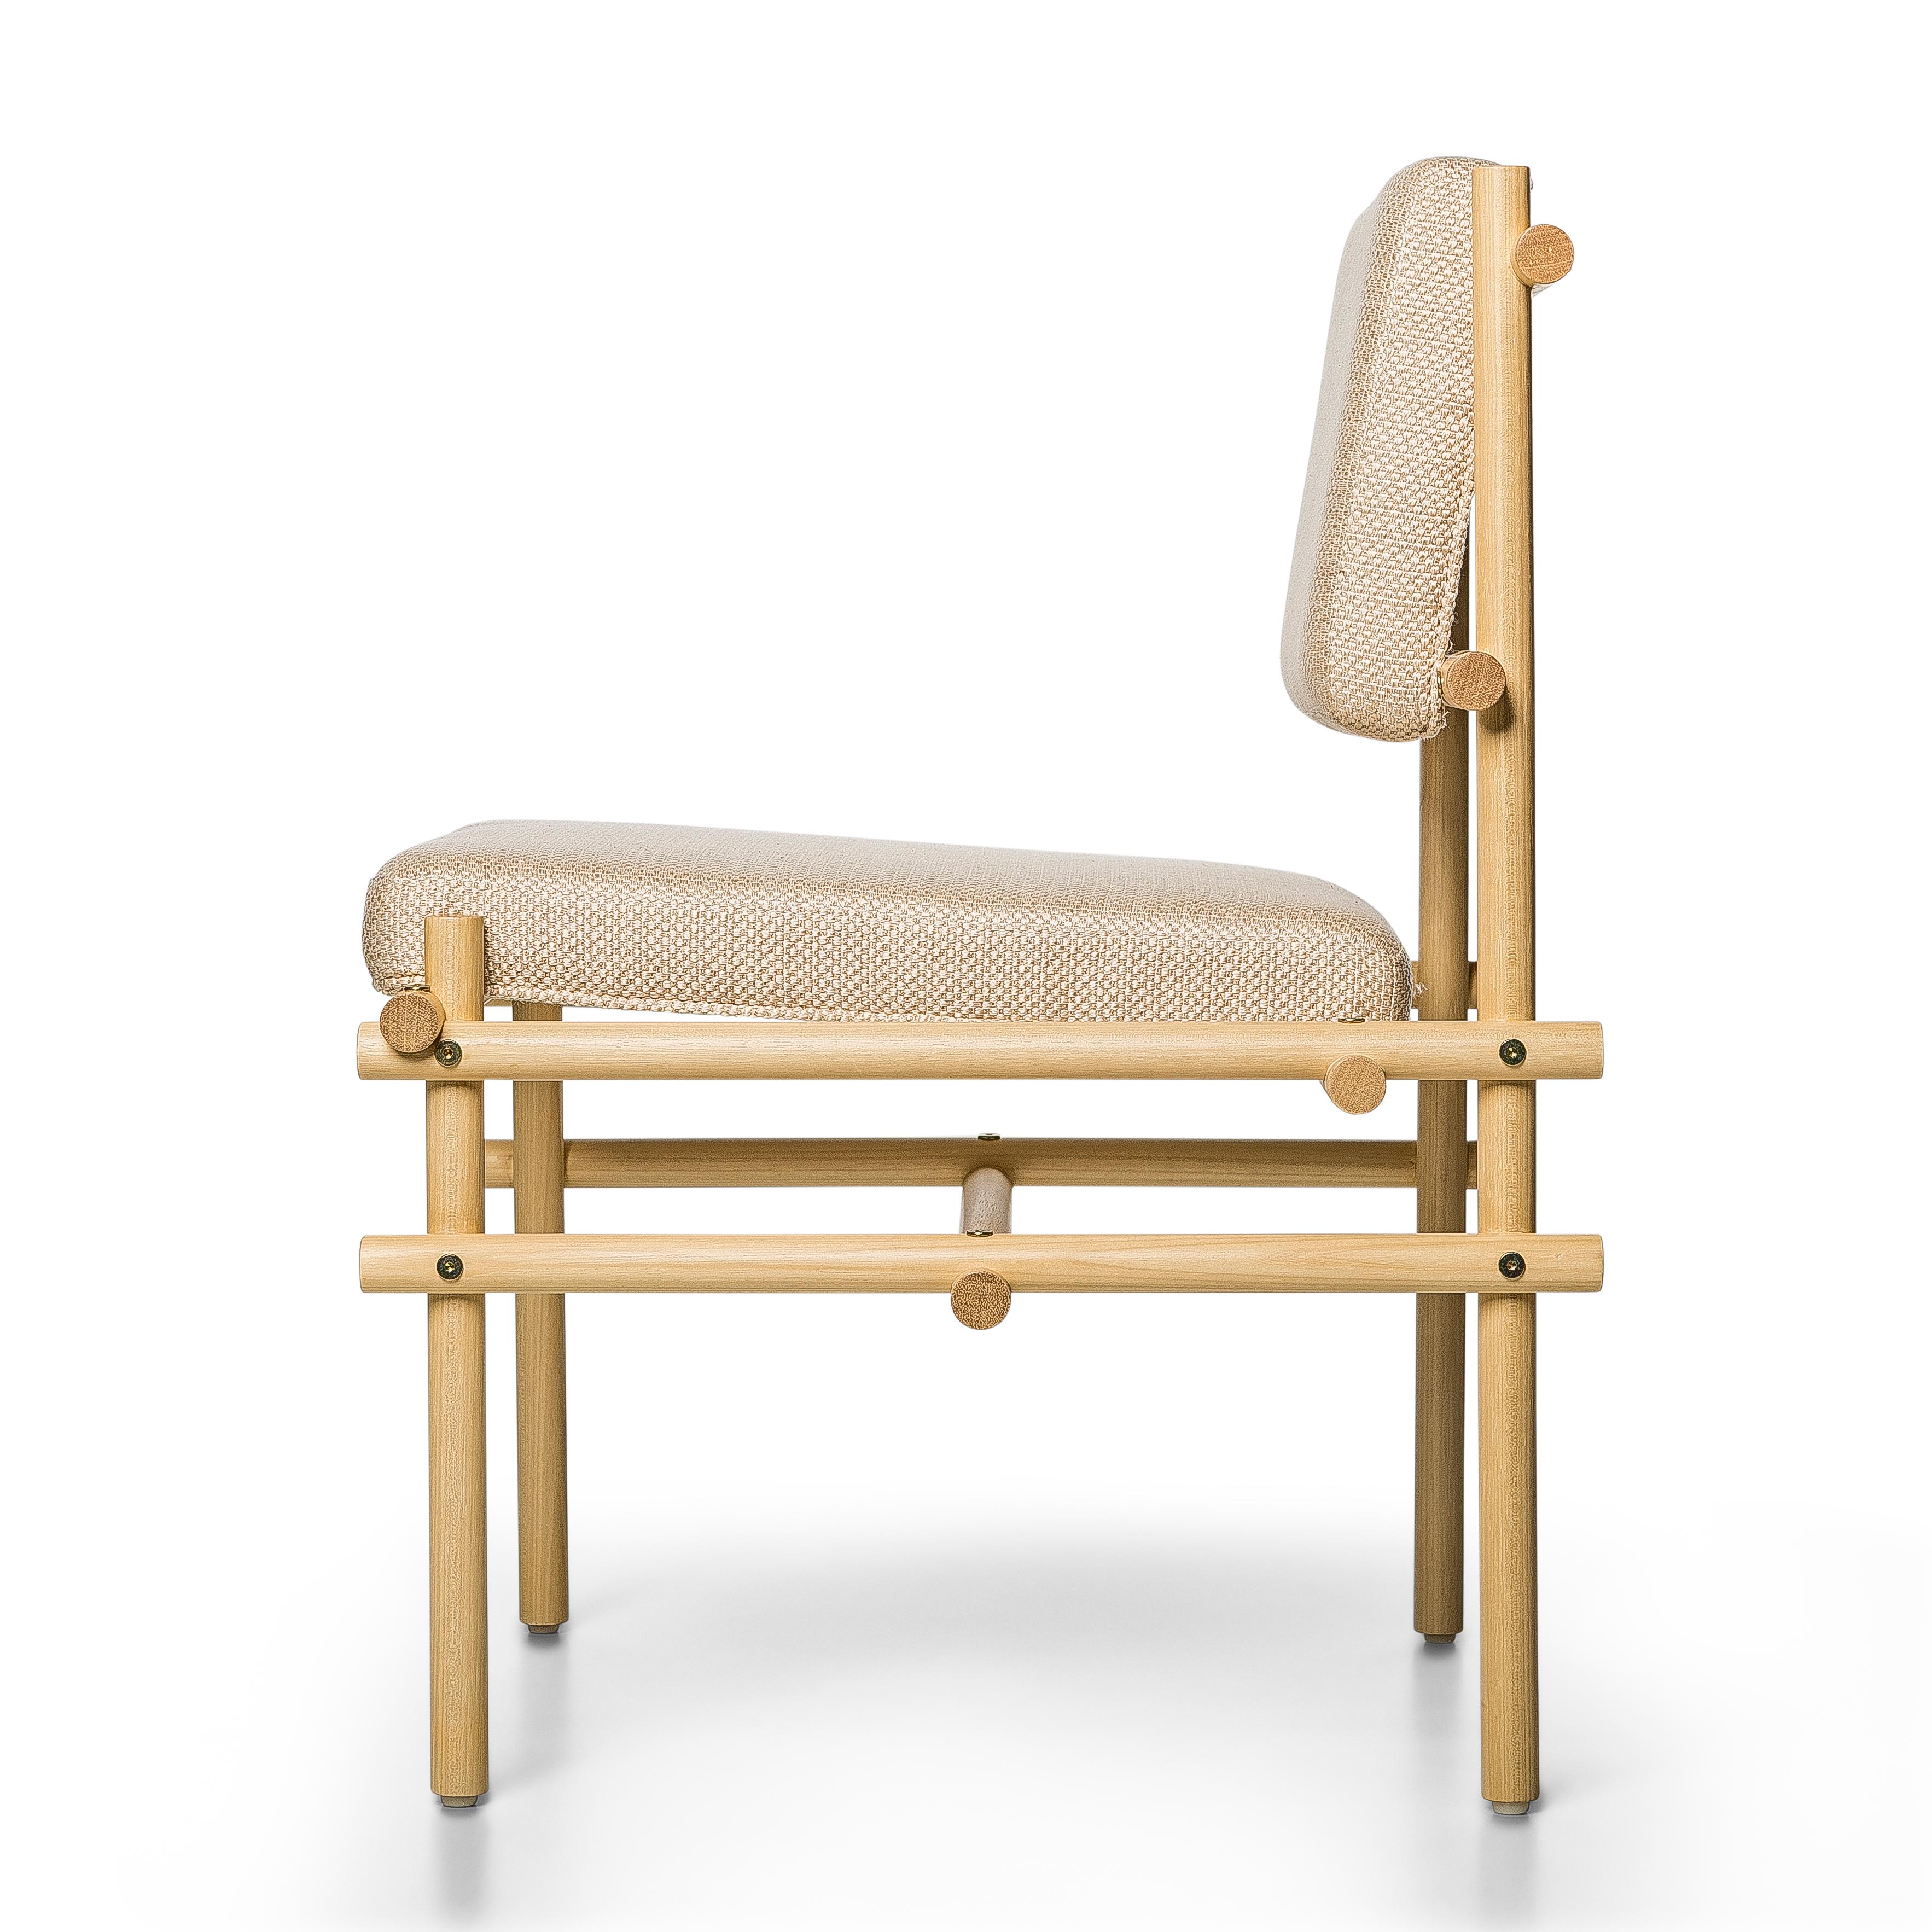 Developed under the premise of Brazilian traditional joinery concepts, Pipa chair is made with Tauari rods, all of the same thickness and with simple inserts and exposed screws.

The chair suggests a natural and organic aspect, but shows a strong